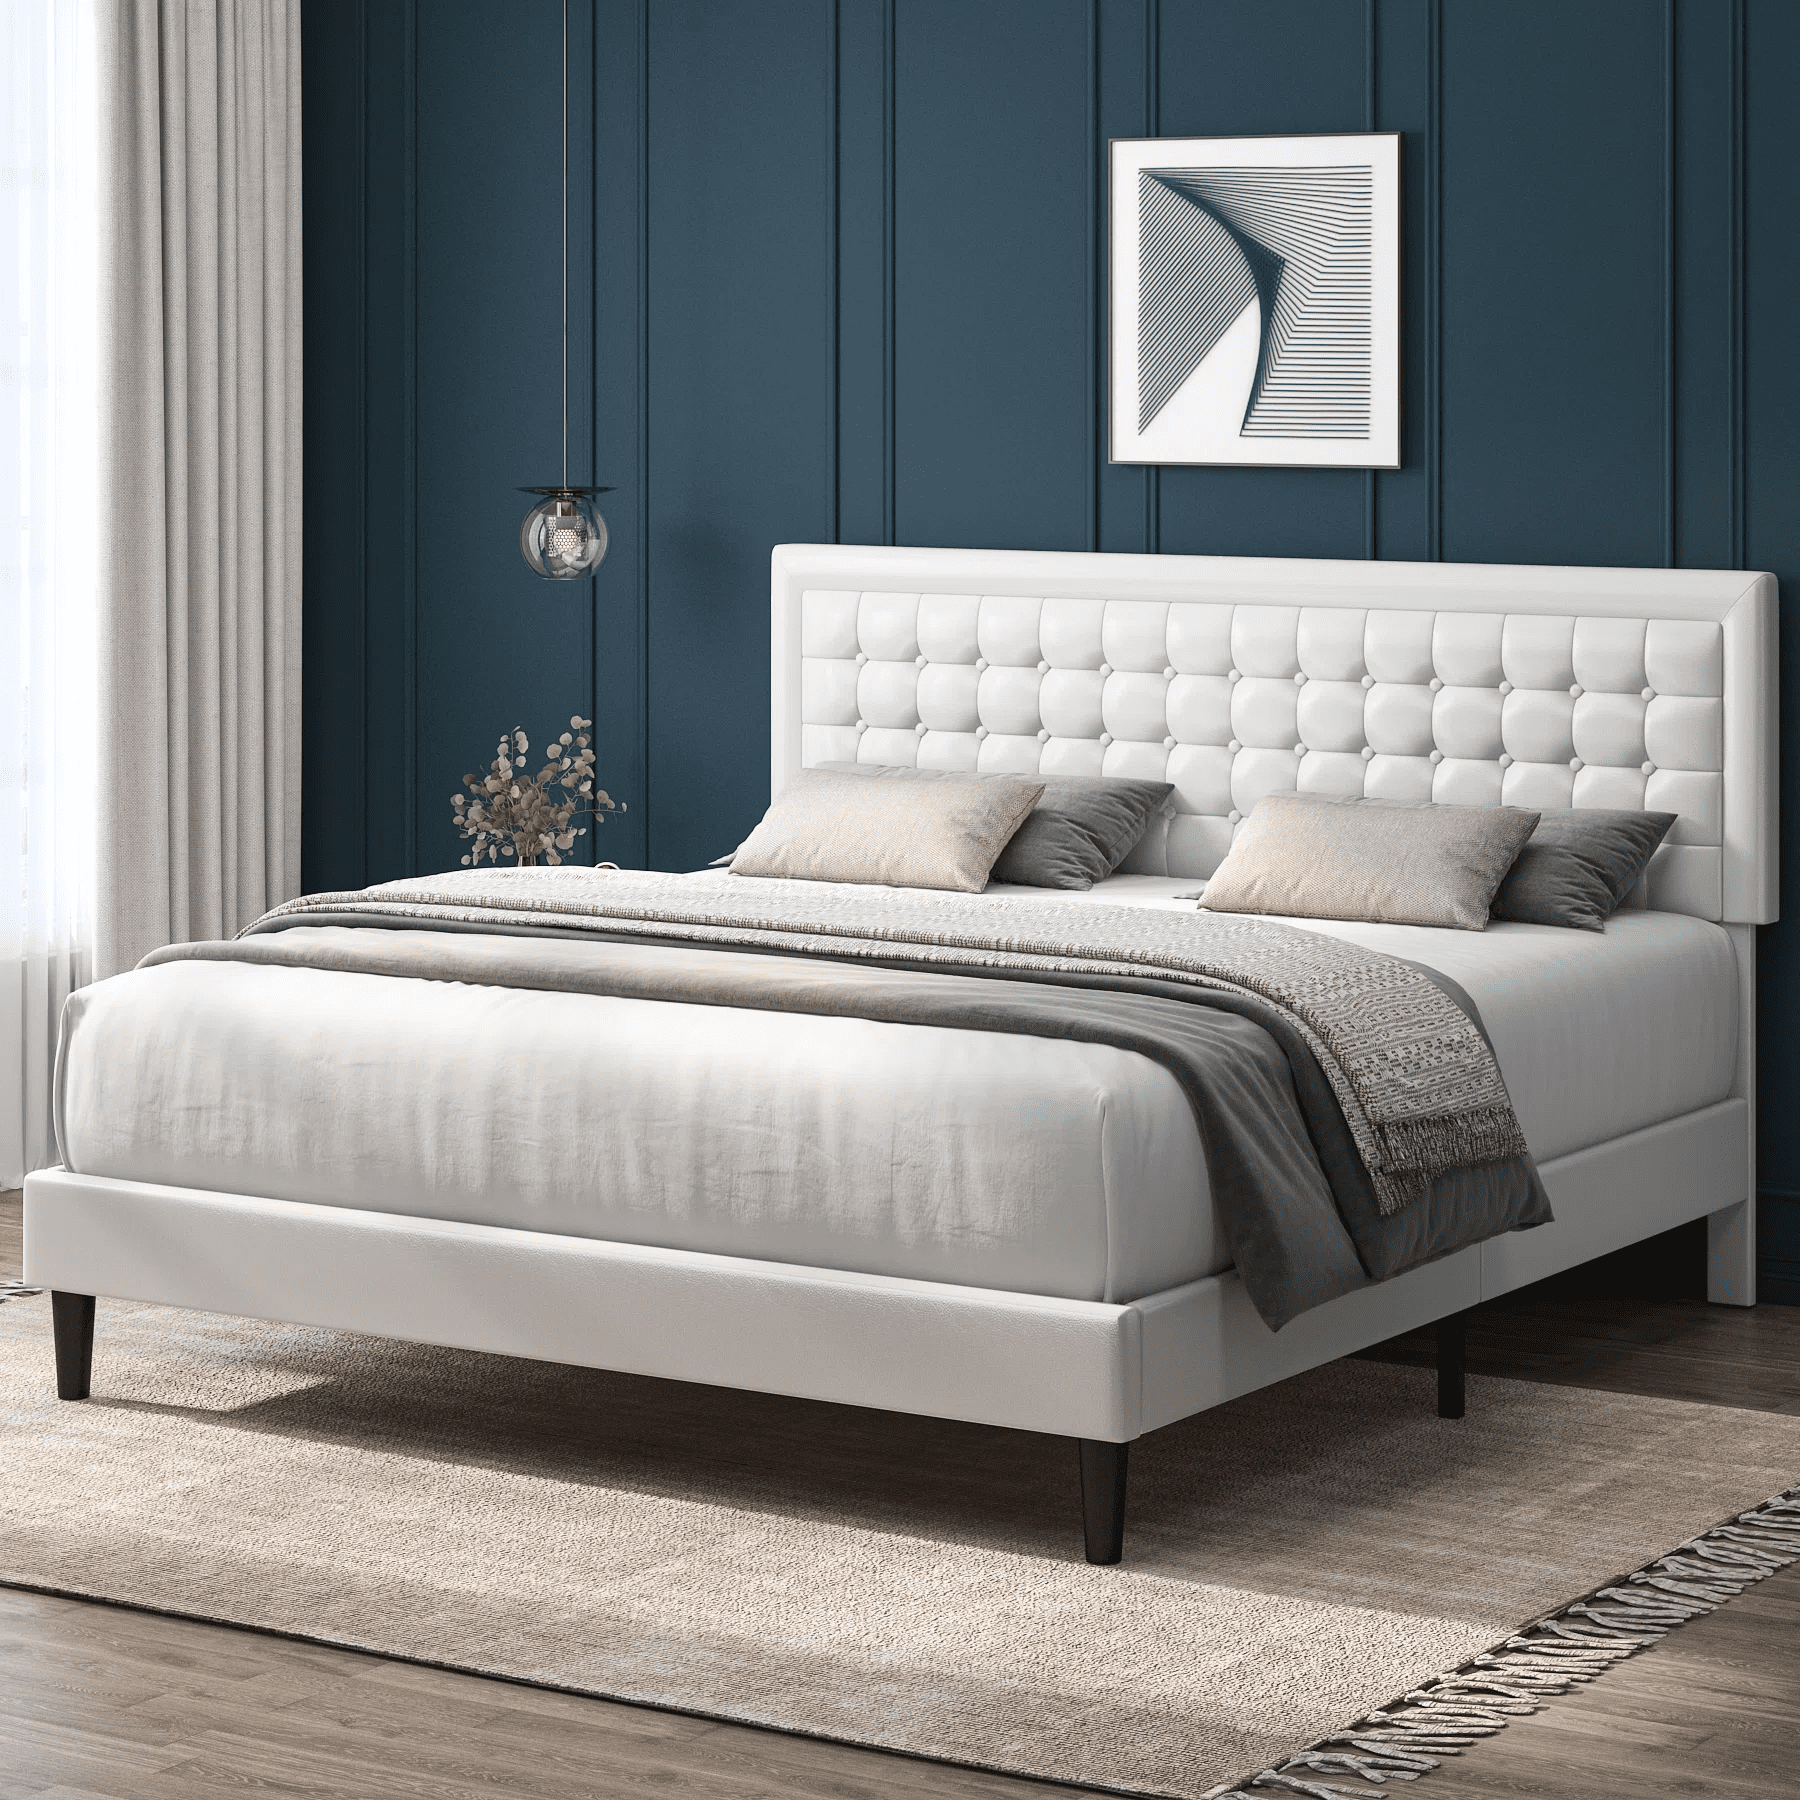 Inzet grens Validatie Homfa Queen Size Bed, Button PU Leather Upholstered Platform Bed Frame with  Adjustable Headboard, White - Walmart.com